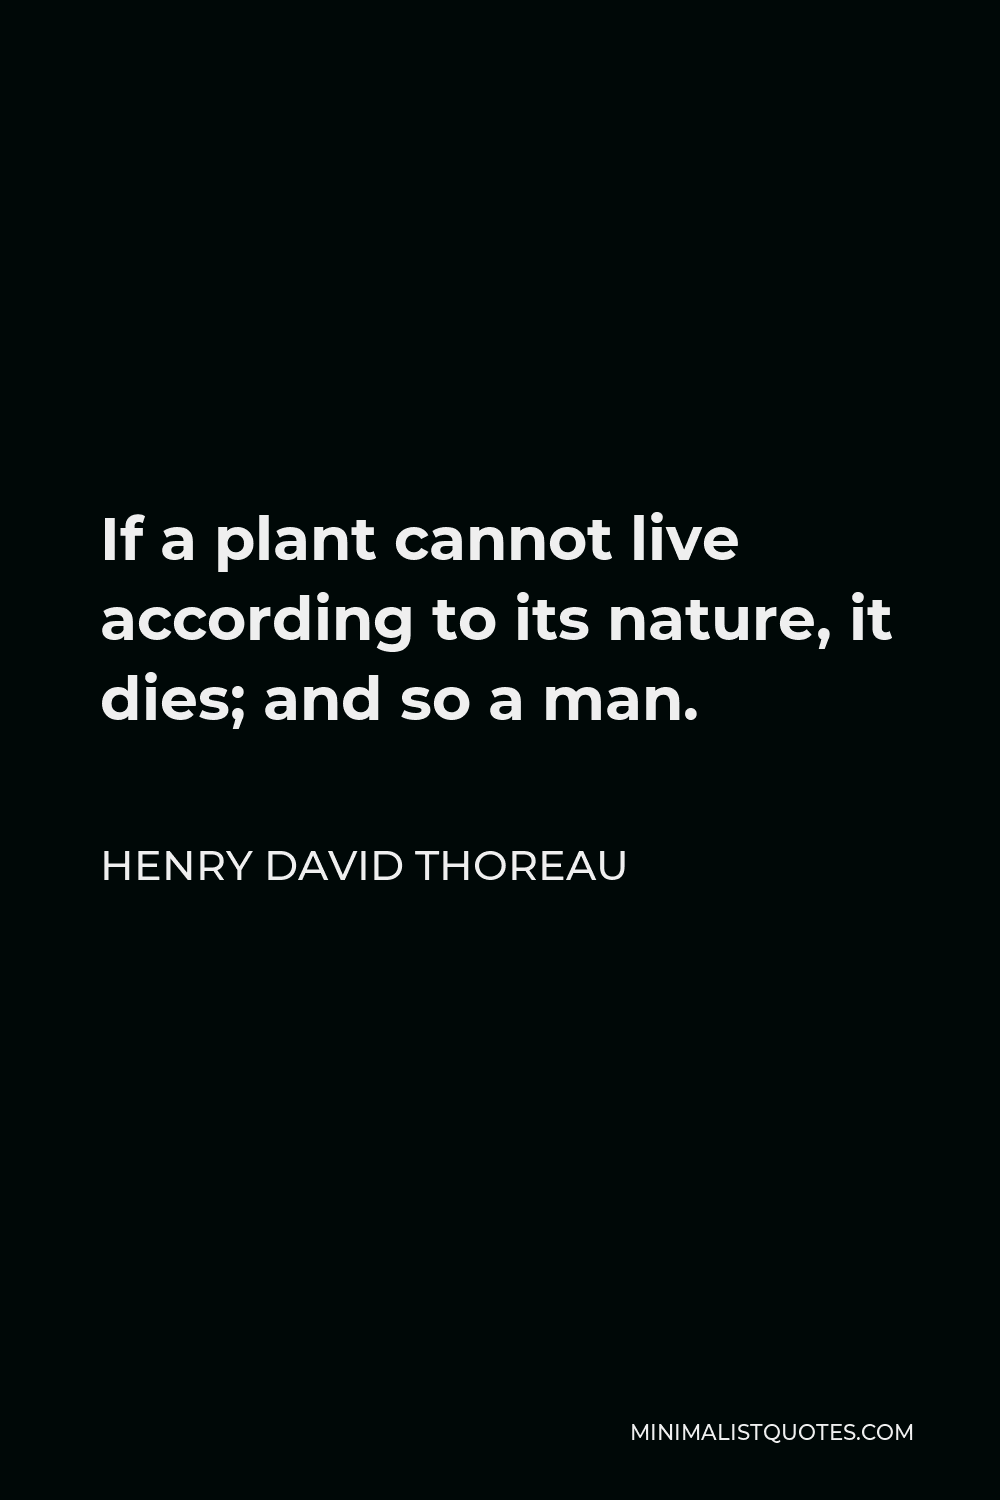 Henry David Thoreau Quote - If a plant cannot live according to its nature, it dies; and so a man.